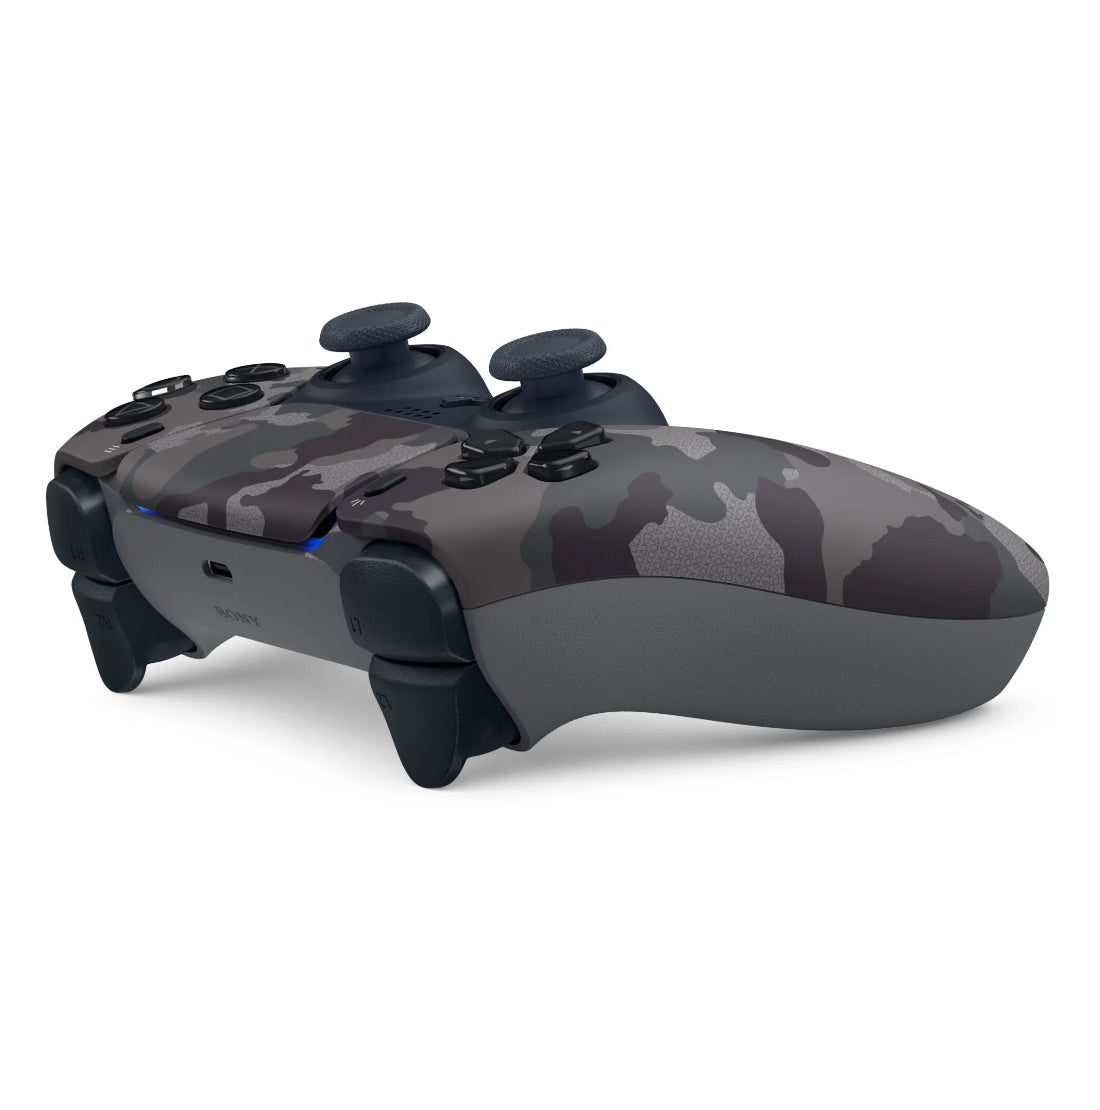 Sony Playstation 5 Digital Edition Bundle with Extra Gray Camo Controller, Black PULSE 3D Wireless Headset. Charging Station and Cleaning Cloth - Pro-Distributing